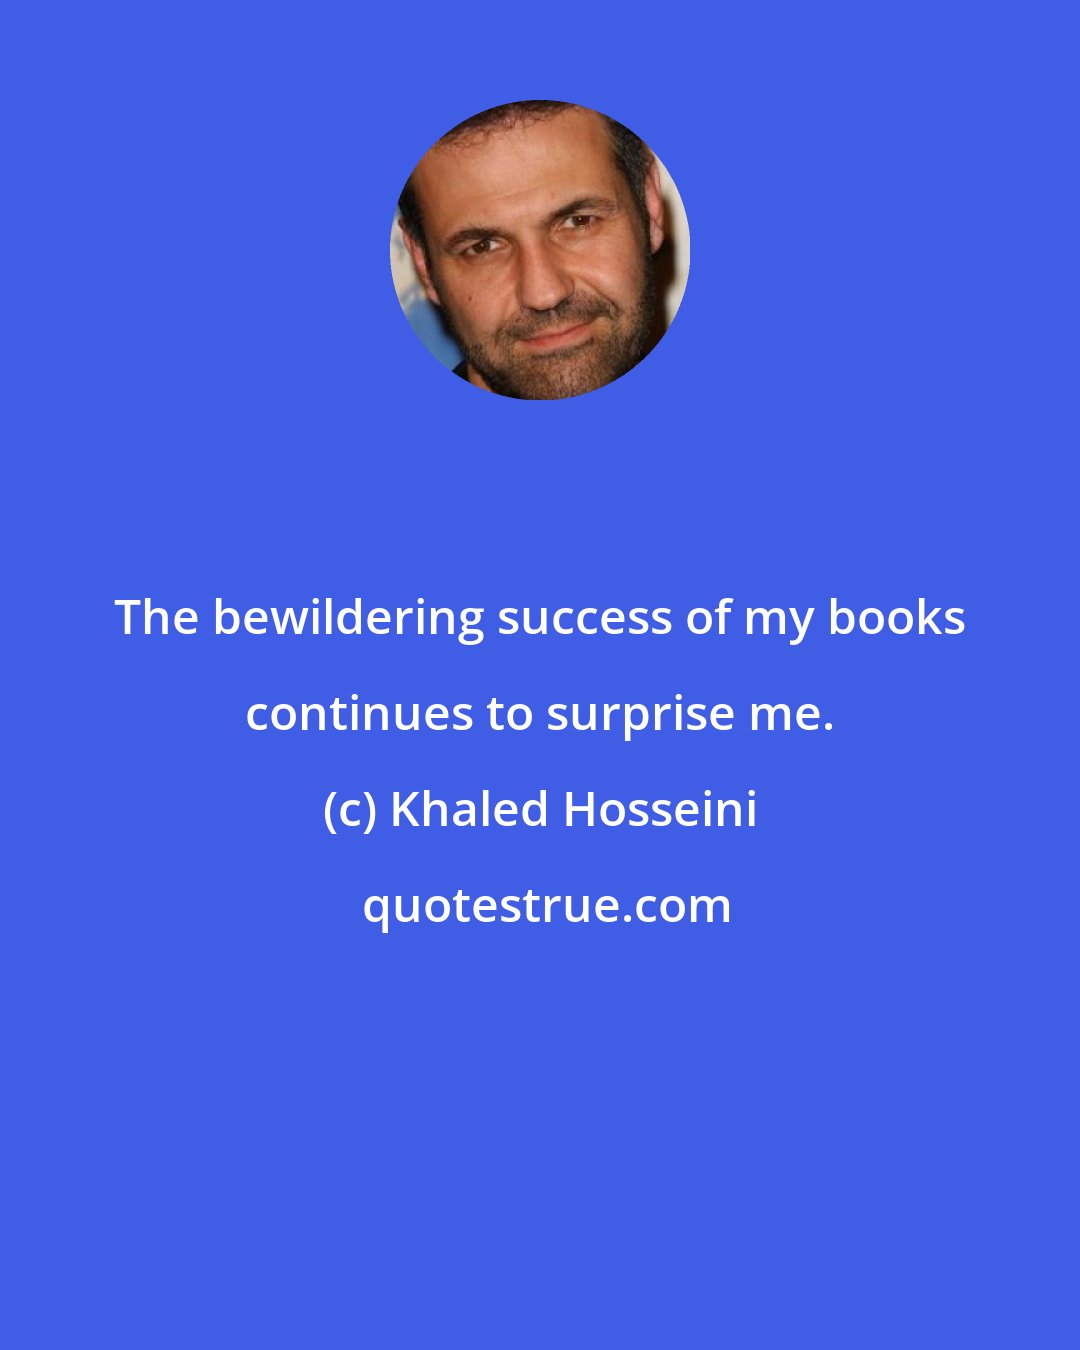 Khaled Hosseini: The bewildering success of my books continues to surprise me.